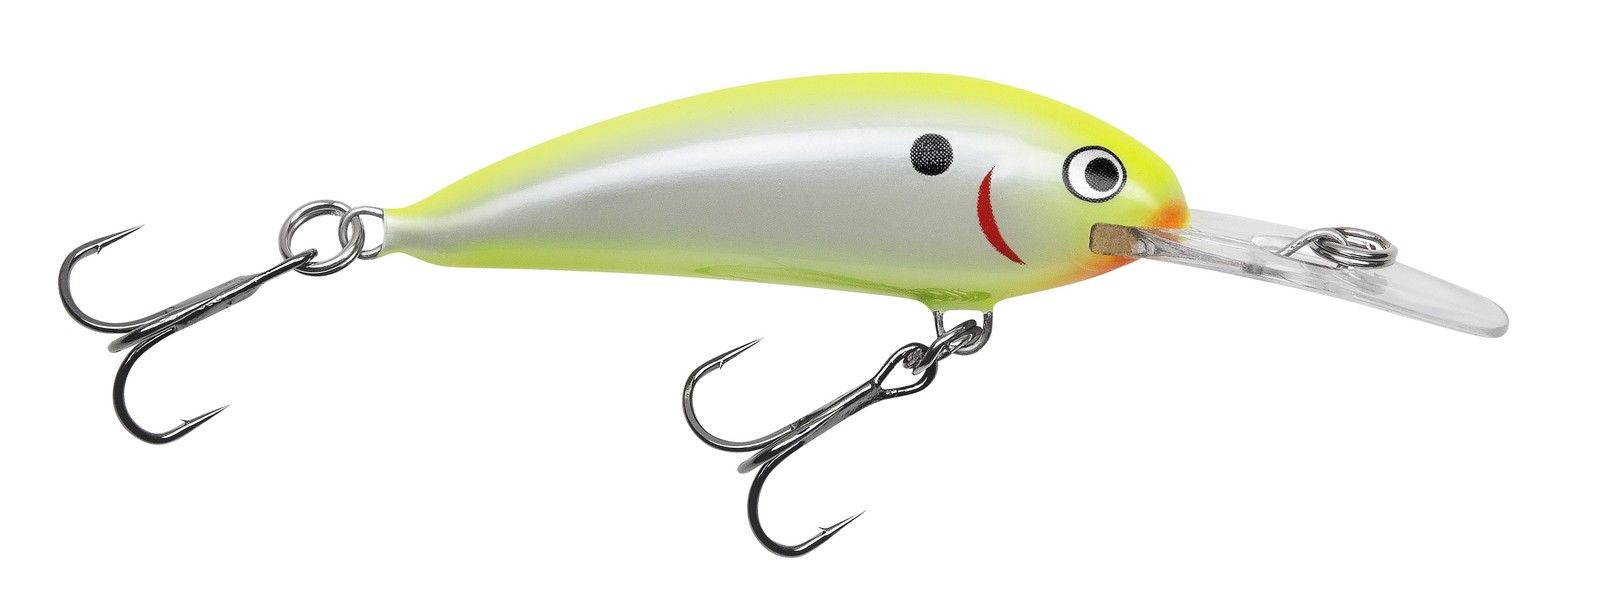 Bagley Balsa Shad 07 Lure Silver Fluorescent Chartreuse 2 3/4" 1/2oz BS07-SFC